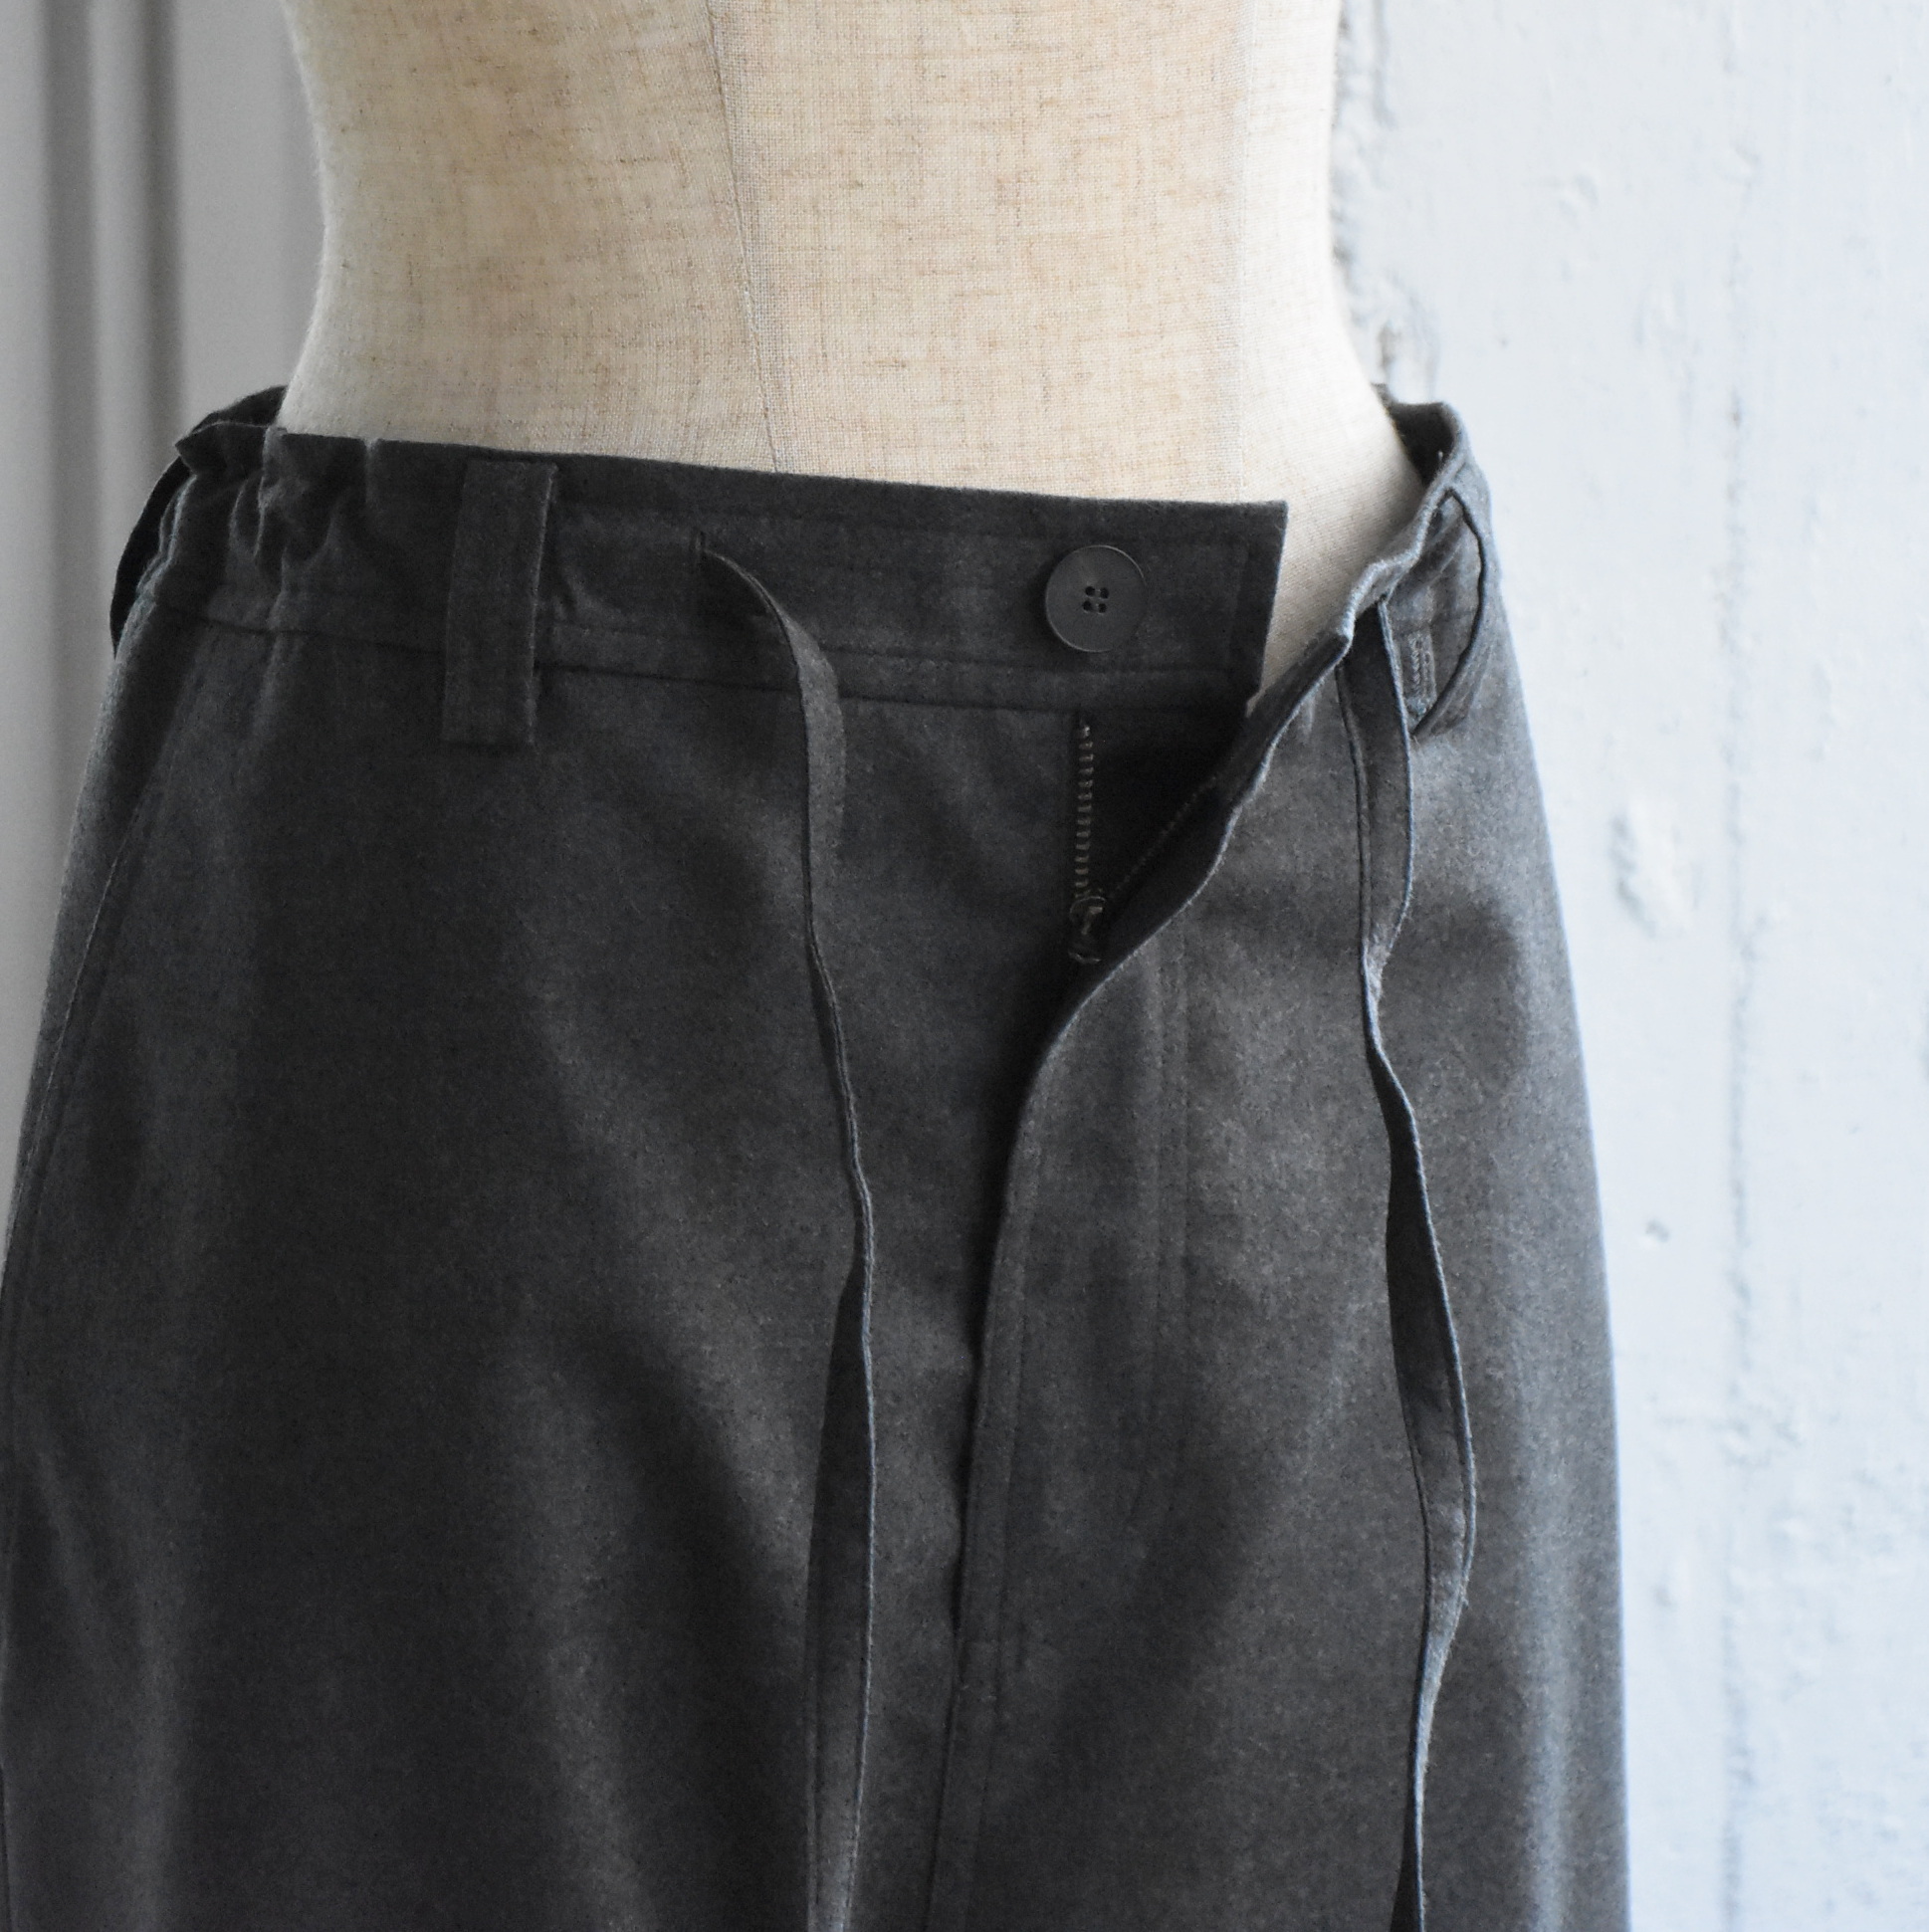 SOFIE D'HOORE(ソフィードール) / Low crotch pants with zip and drawstring【2色展開】(10)